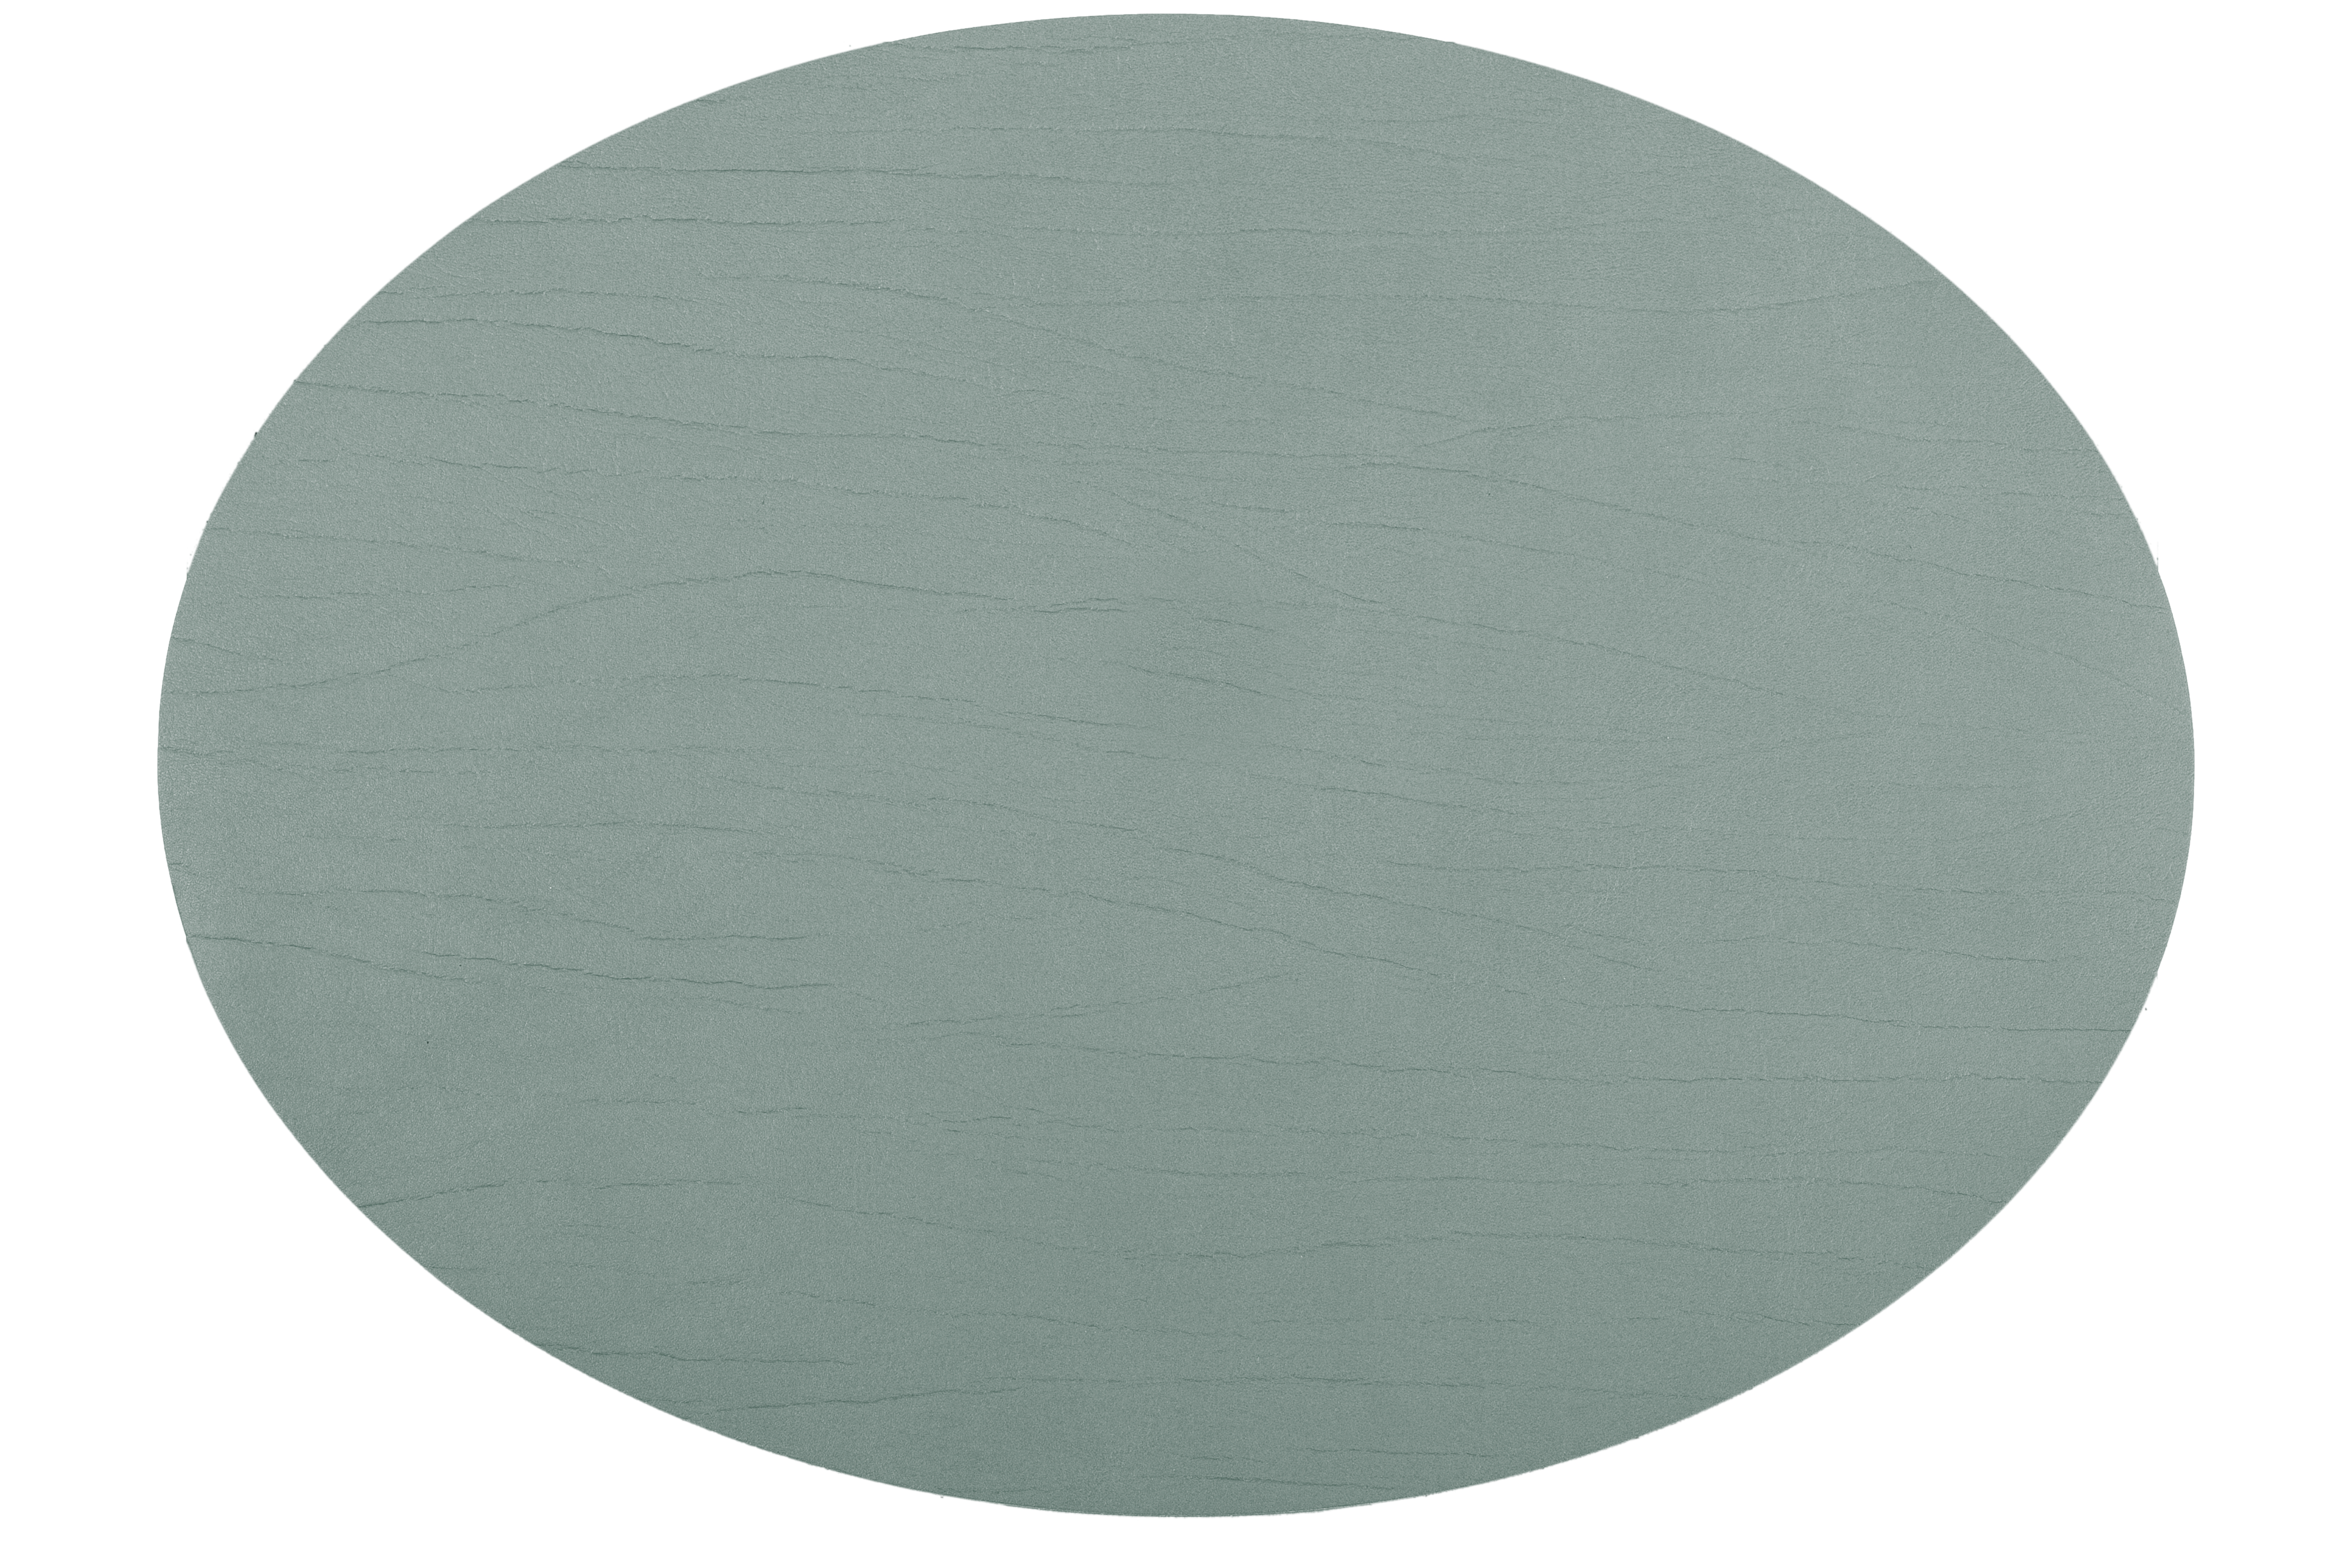 Titan placemat oval, 33x45cm, stone green double sided